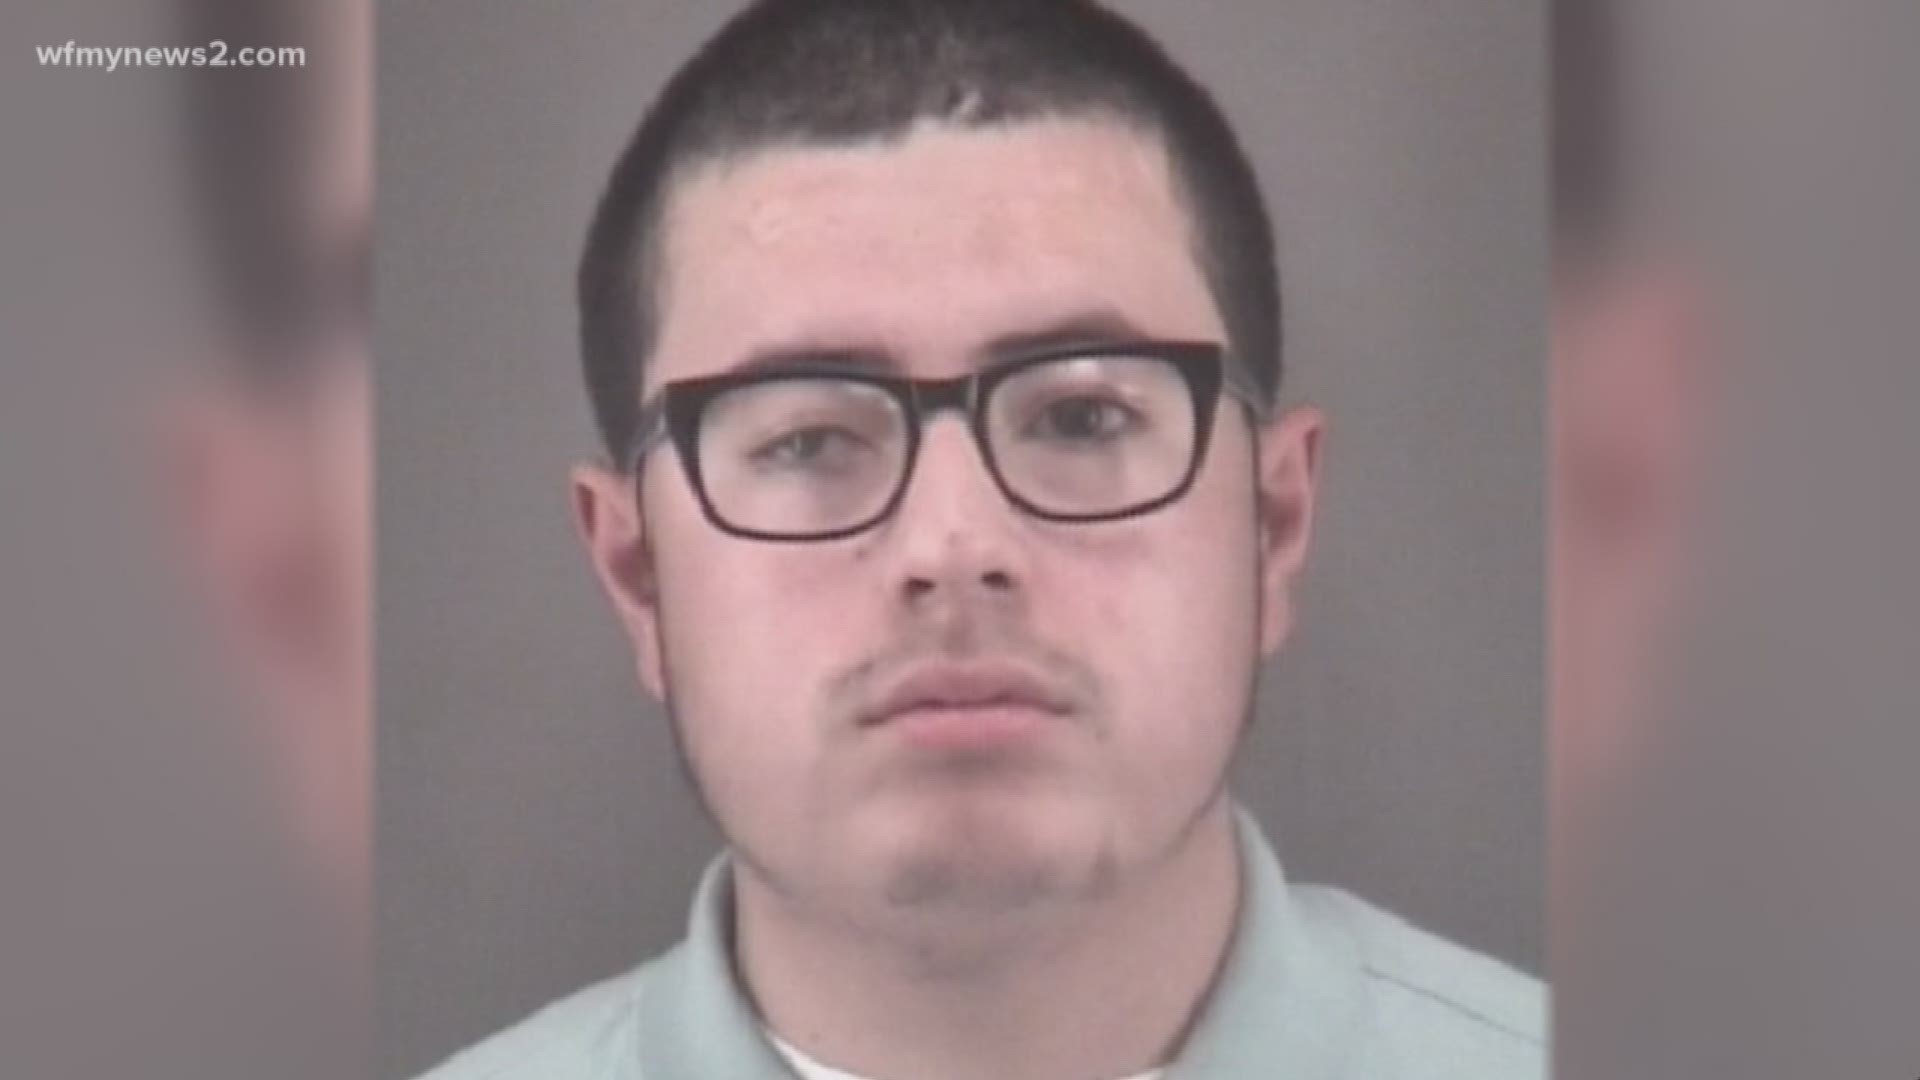 Today we're learning more about Dennis Maldonado, the man charged with threatening to attack three schools.